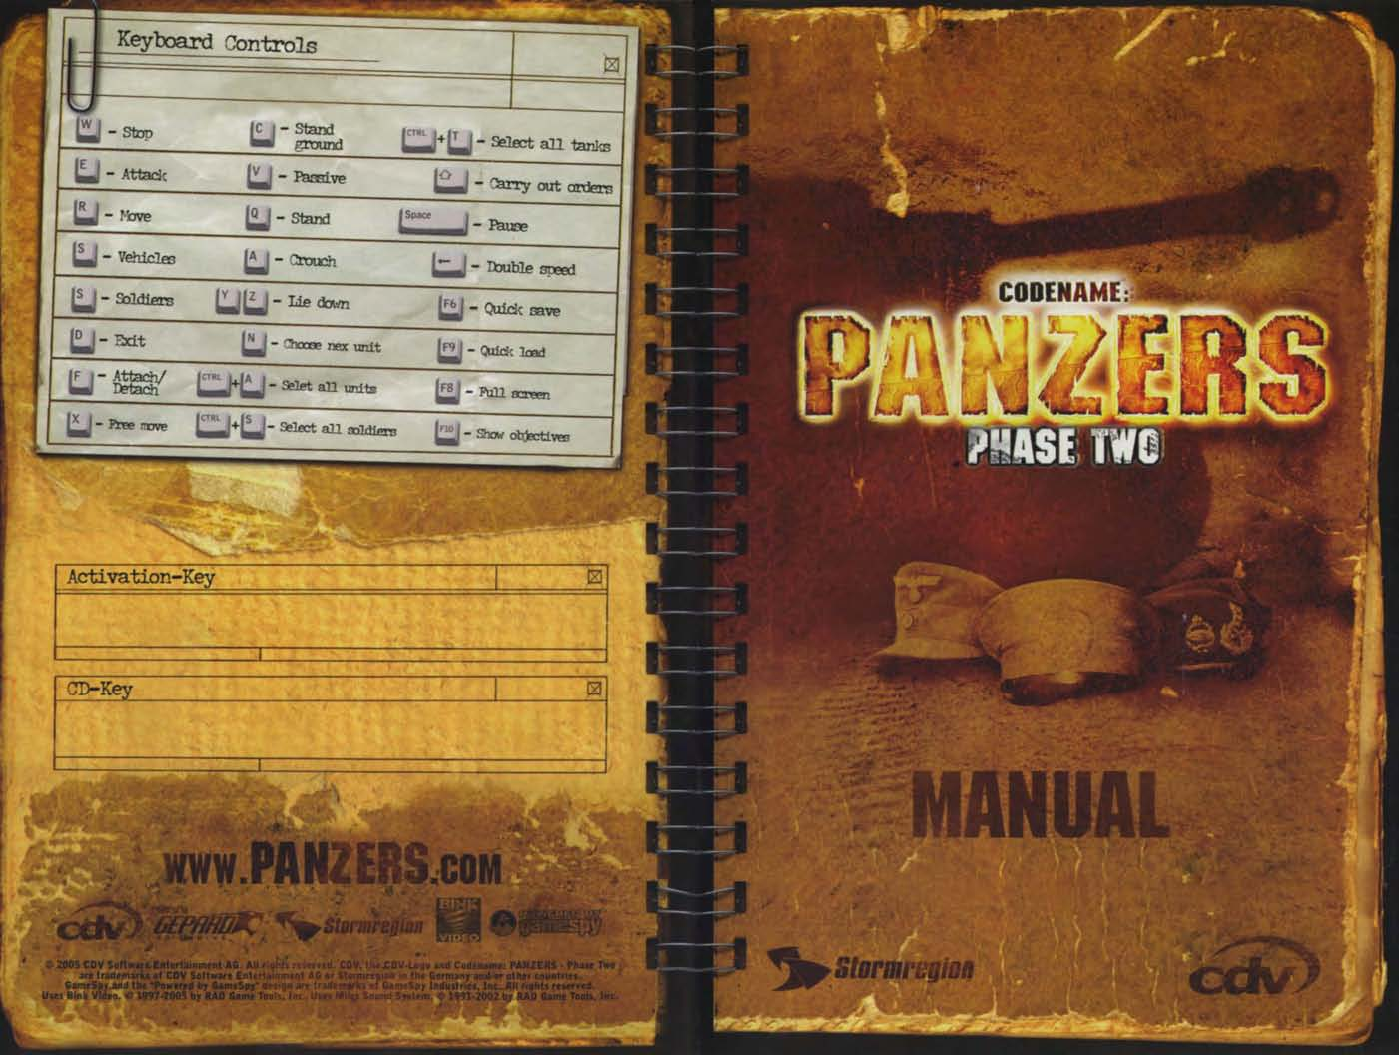 Games PC CODENAME-PANZERS PHASE TWO User Manual